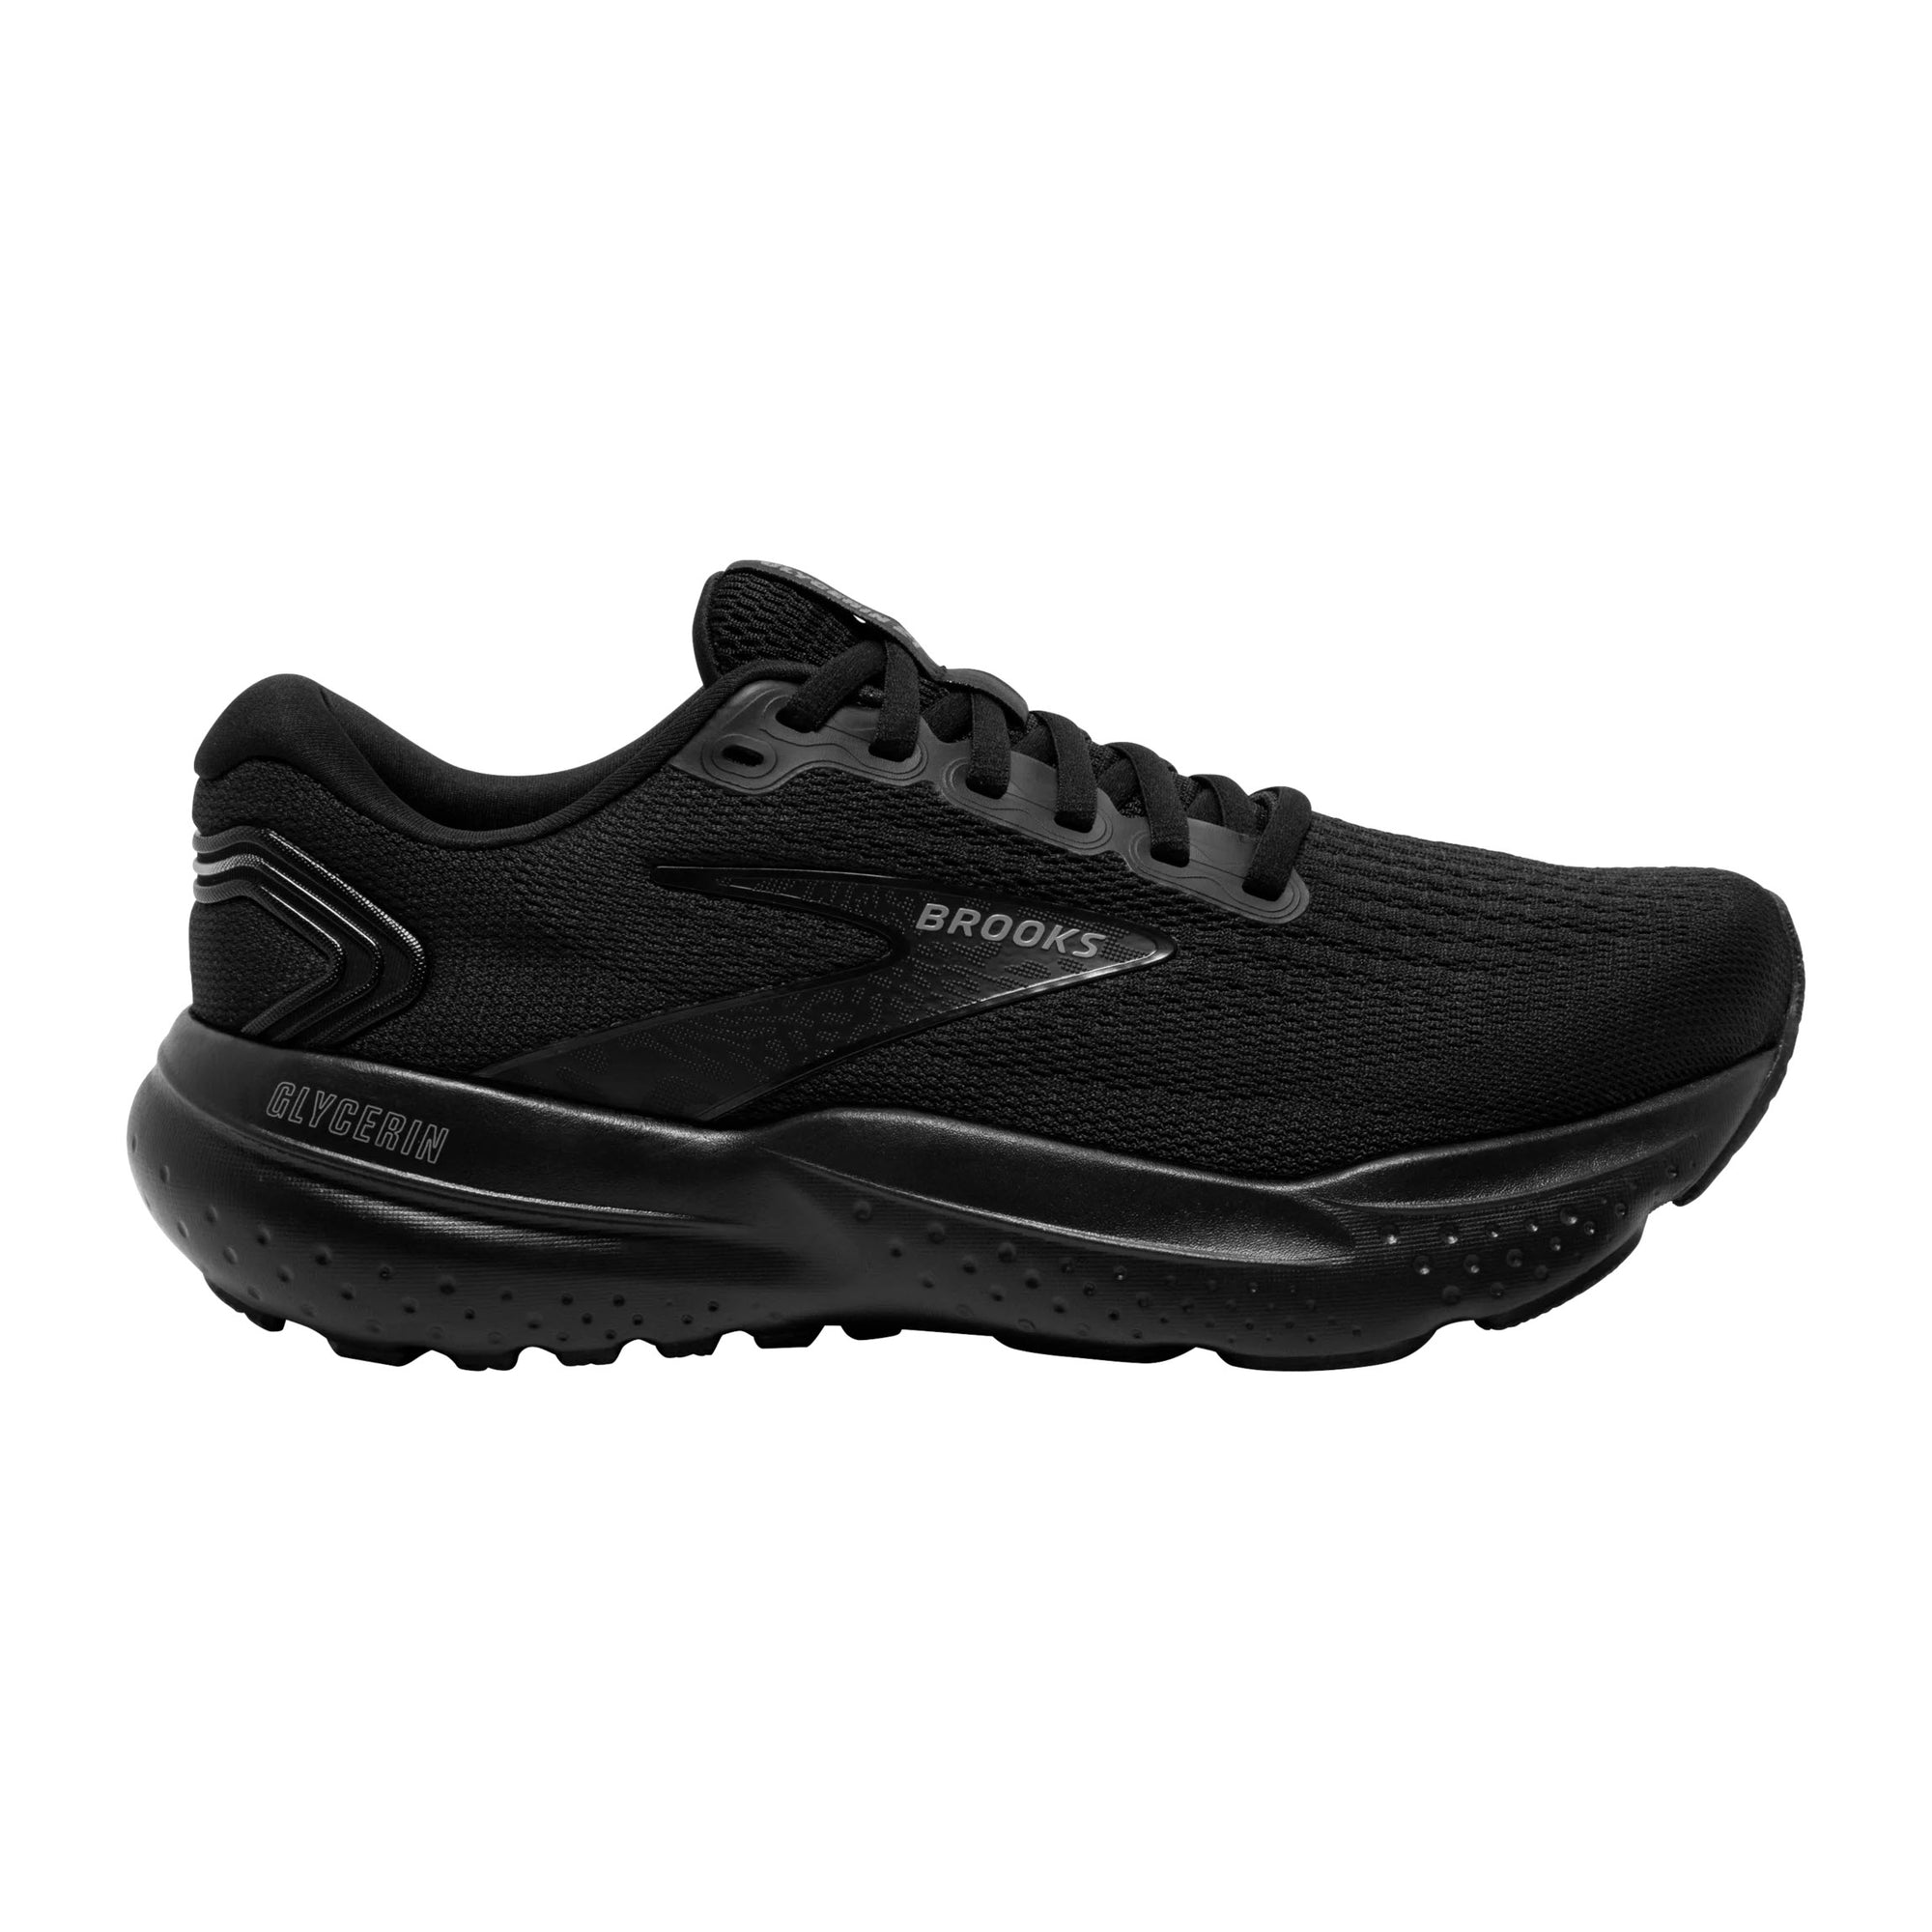 A black Brooks Glycerin 21 women's running shoe with a textured sole and visible DNA LOFT v3 cushioning, isolated on a white background.